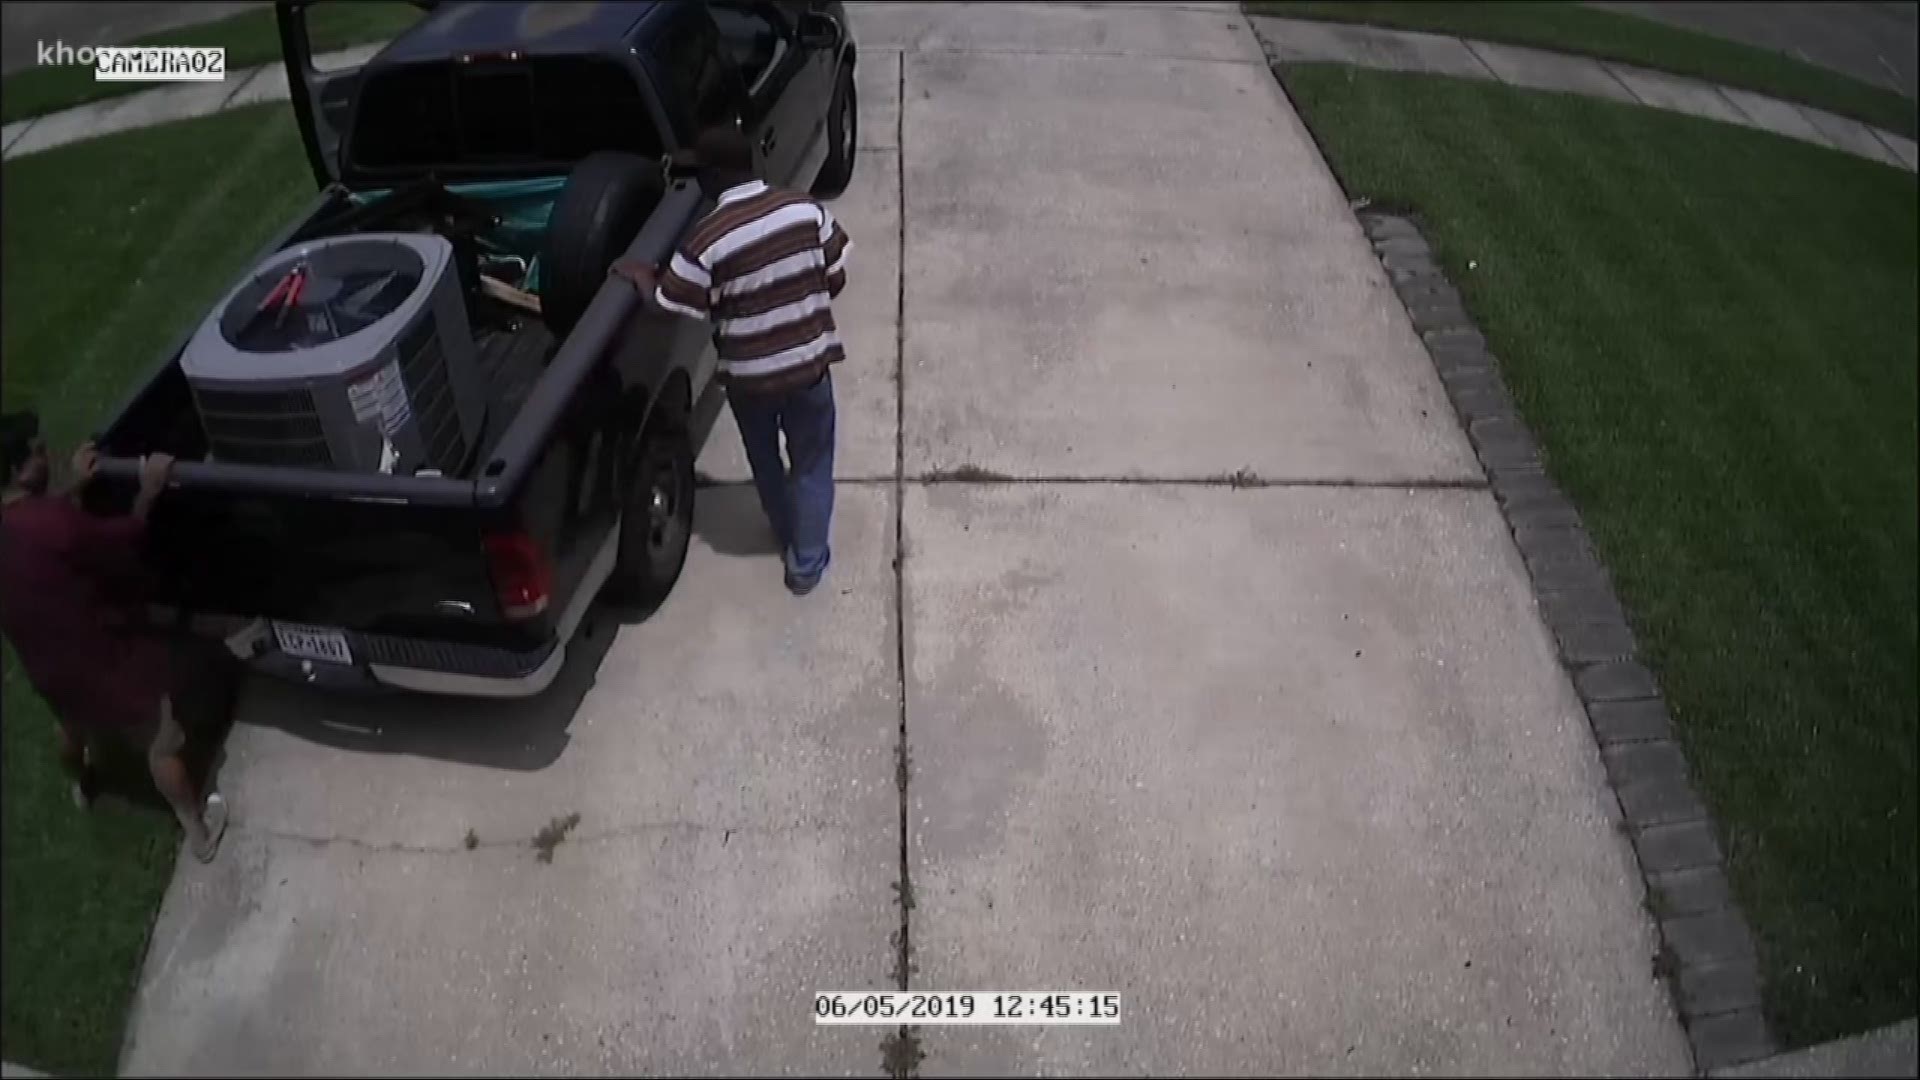 It's getting hot out there and air conditioners are a hot commodity. We caught some guys on camera stealing an AC unit from a home in Atascocita.